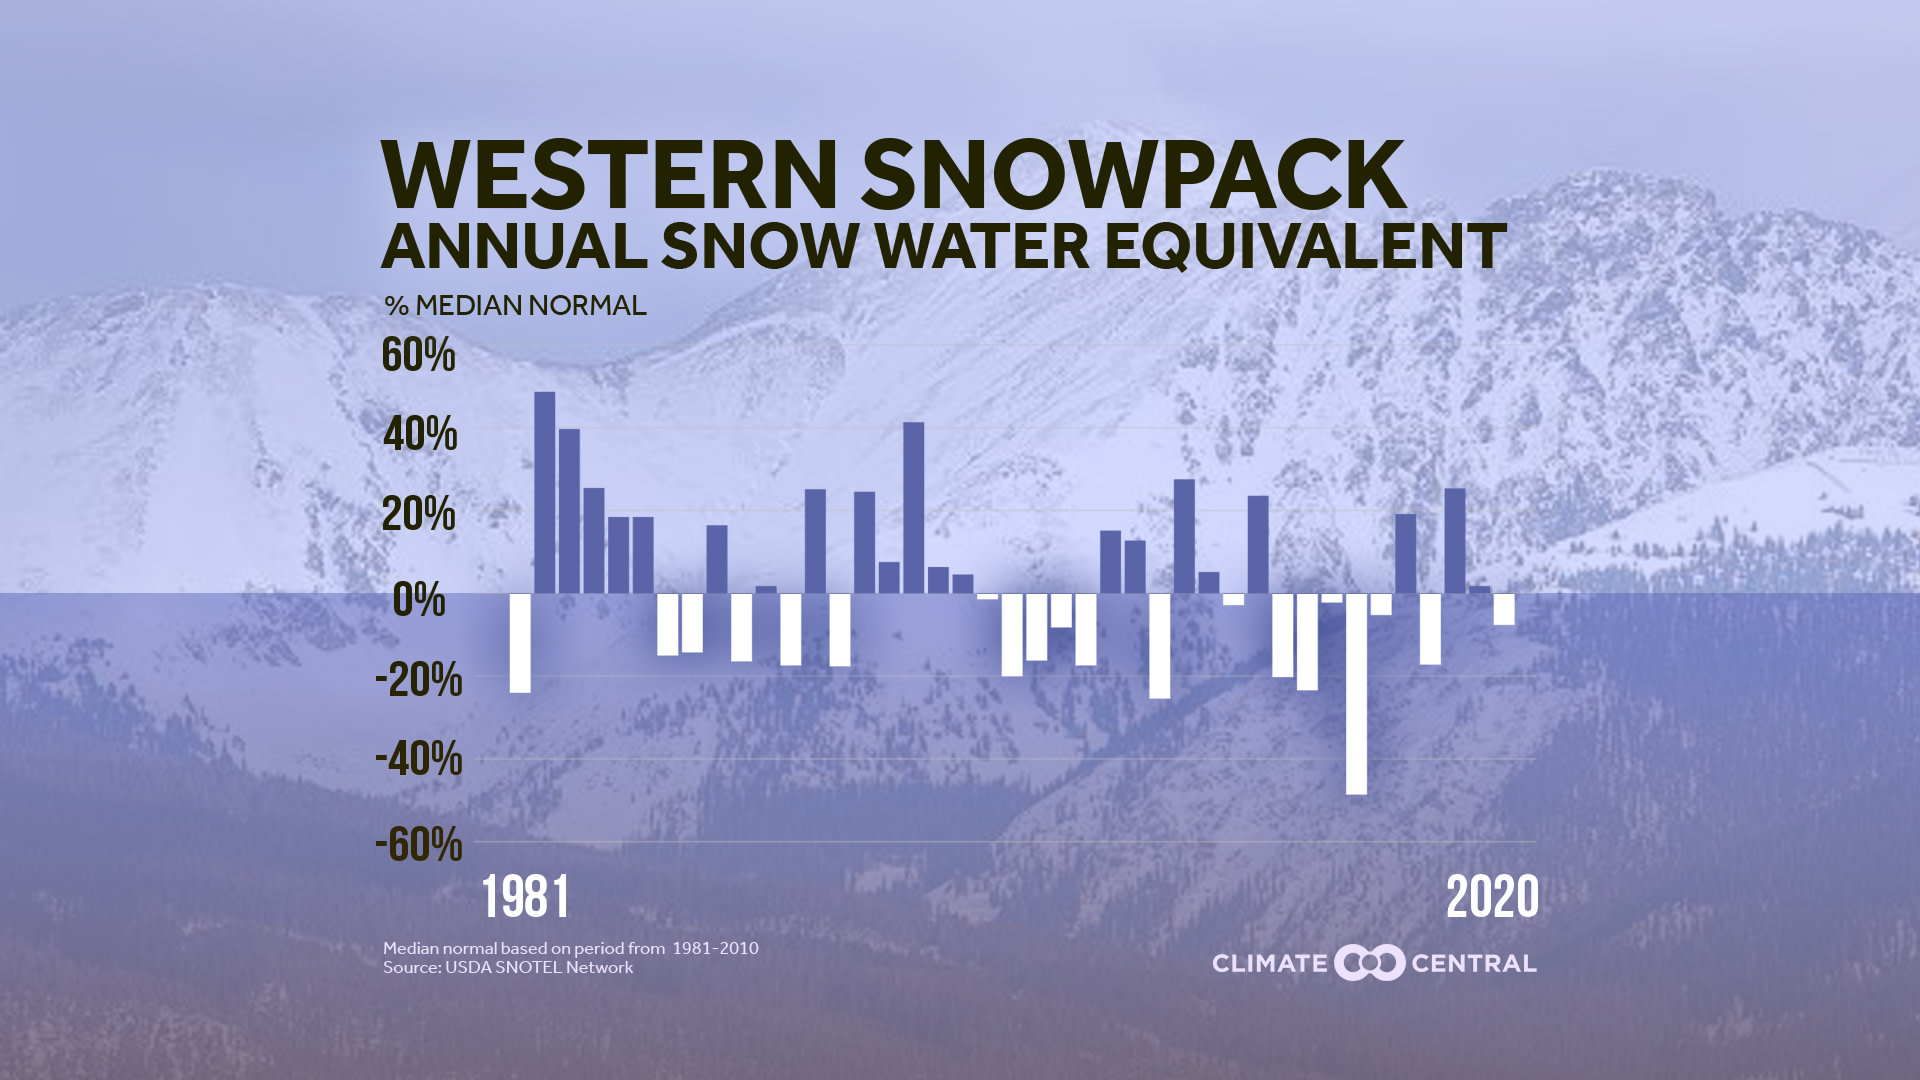 Decline of Western Snowpack - Drought and Western Snowpack